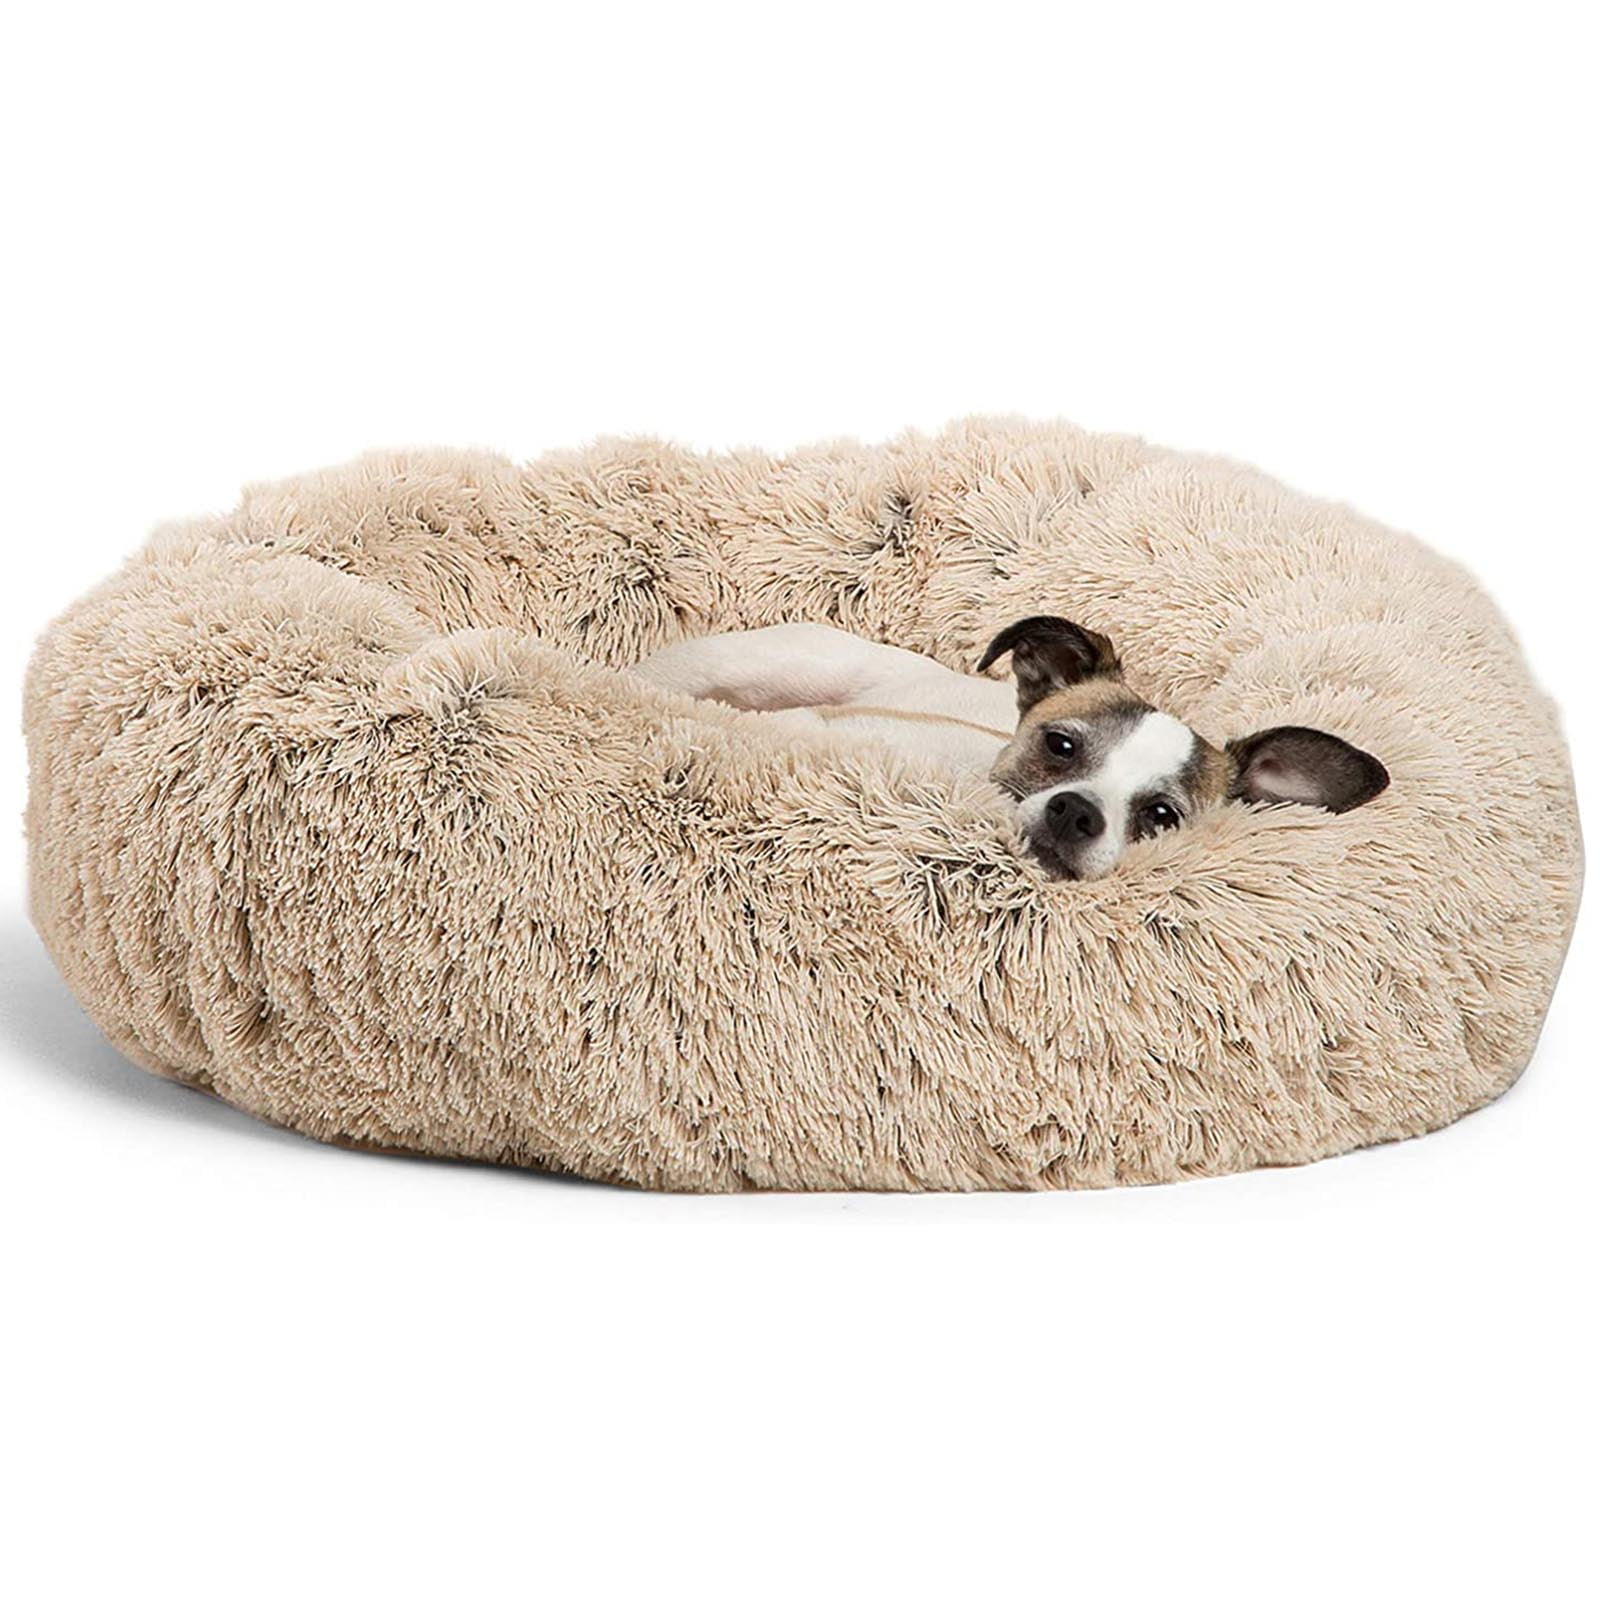 Large Soft Firm Support 28" x 17" Plush Sheep Fur Pet Bed 